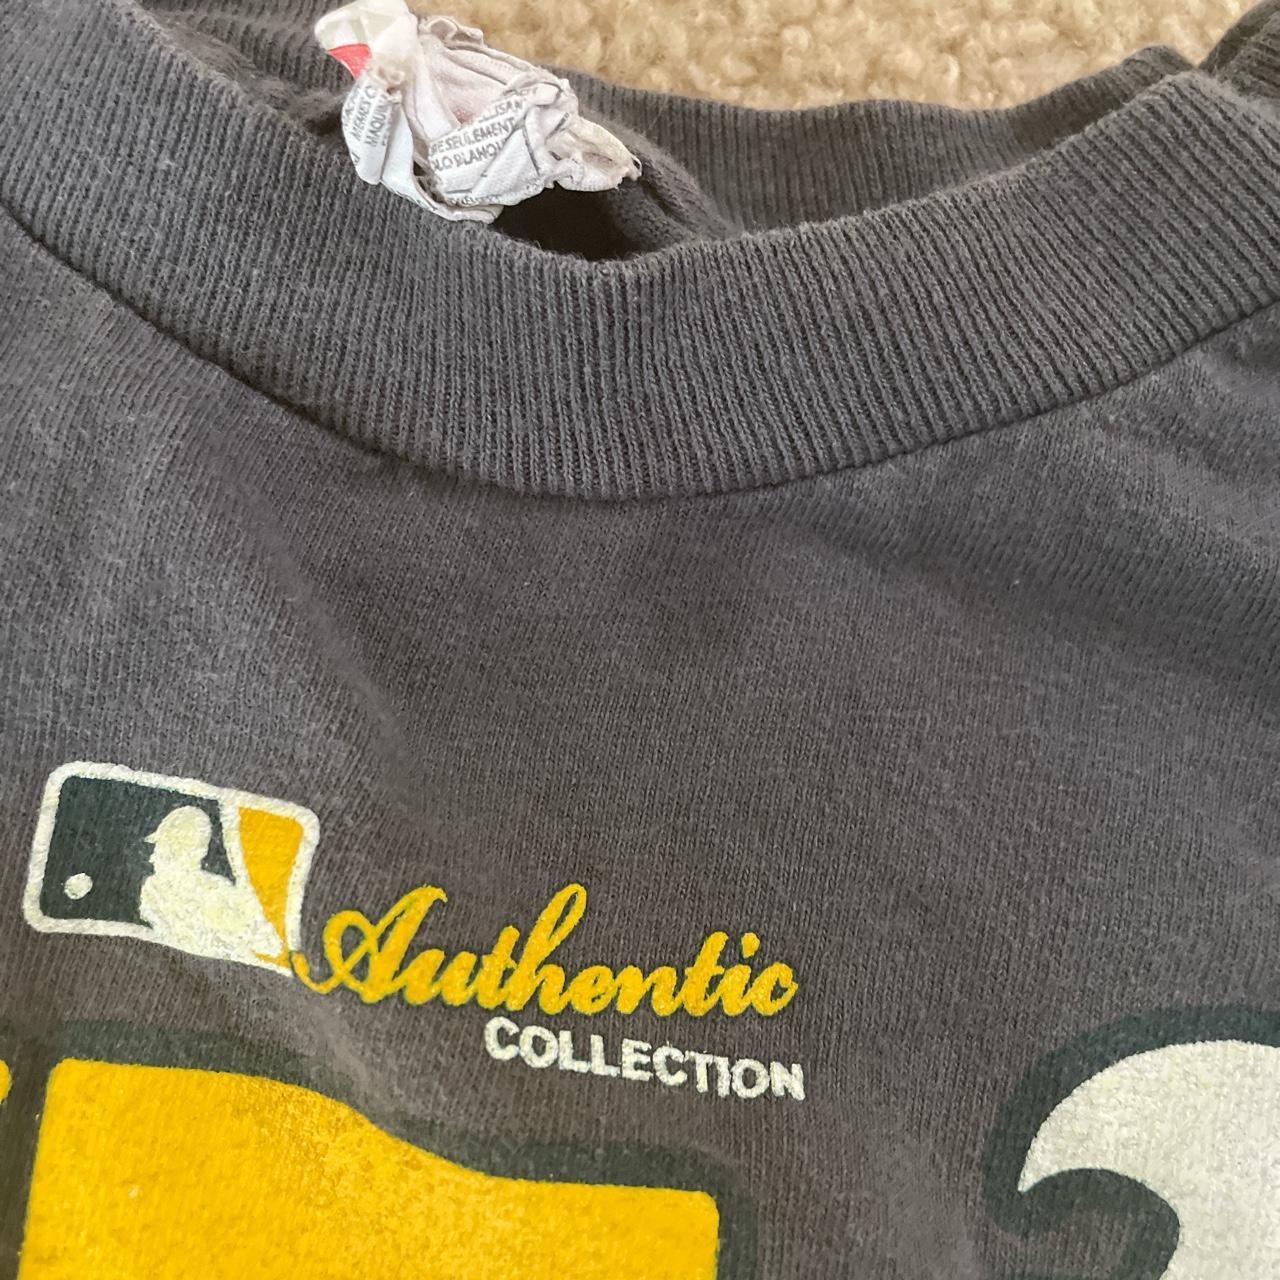 Baseball Tee in the design of the Oakland Athletic's - Depop